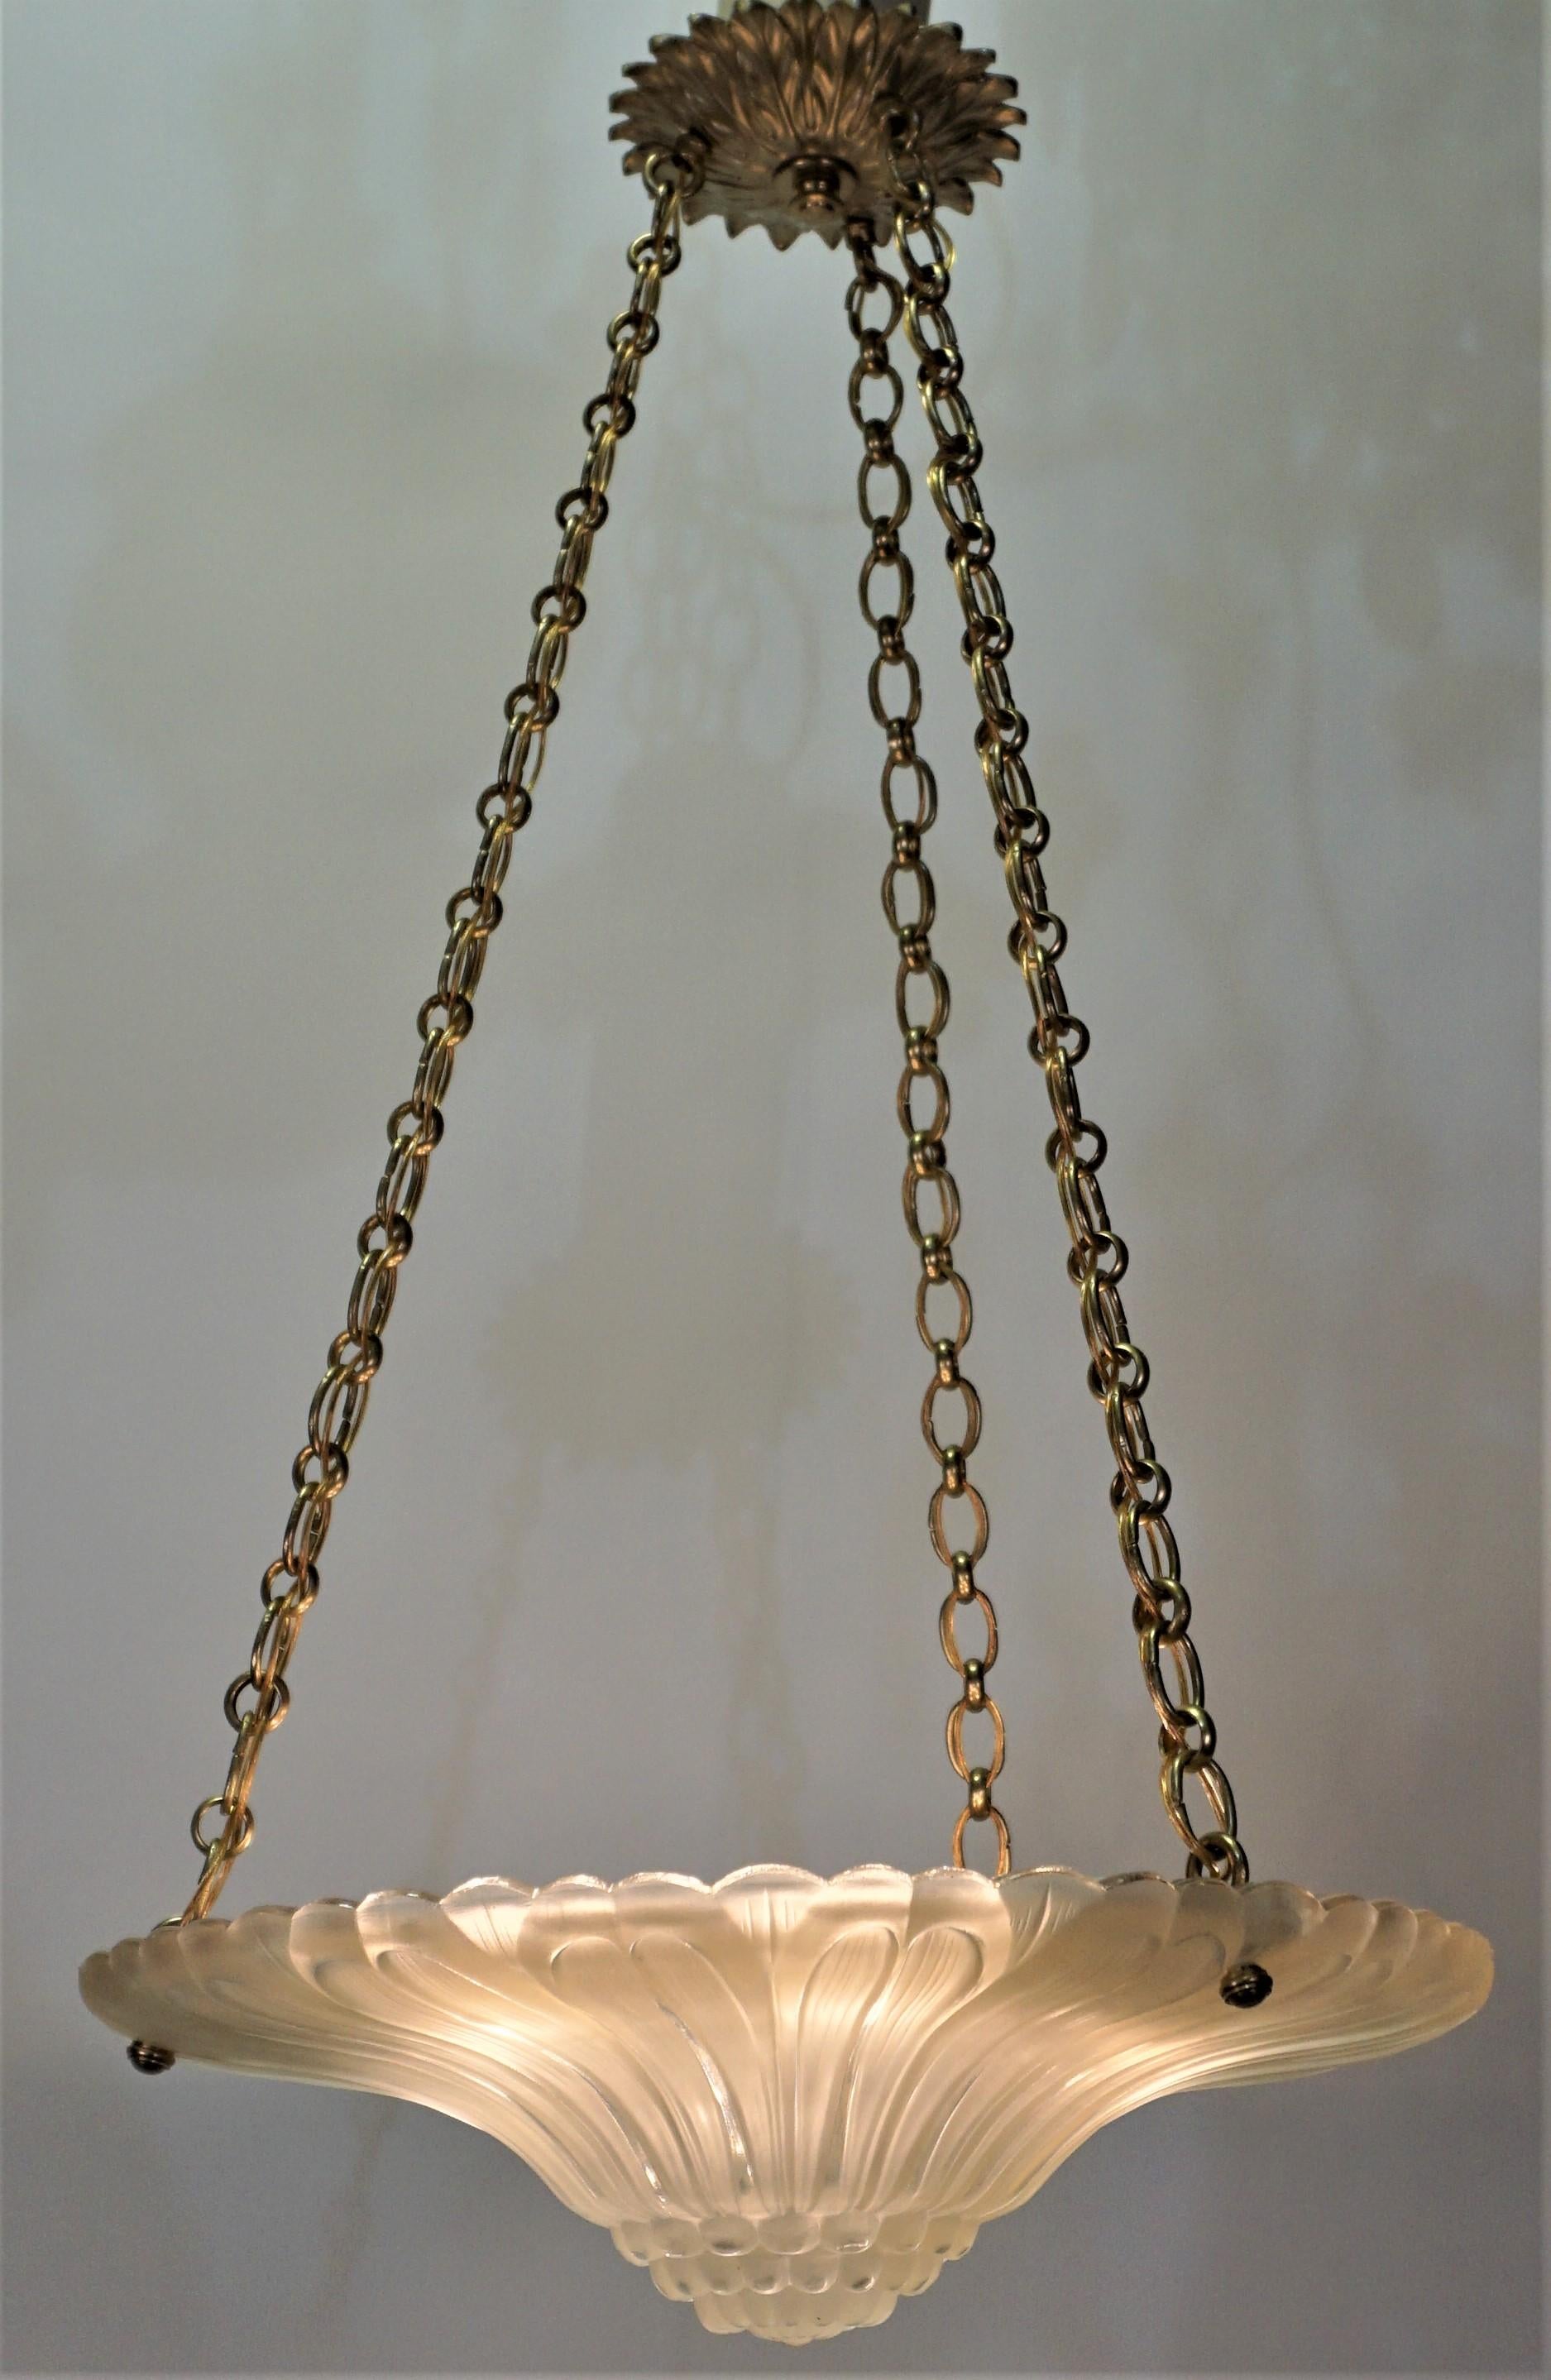 An elegant clear Frost glass with bronze mounting Art Deco chandelier.
Six lights 60 watts each max.
Height can be adjusted by removing some of the chain.